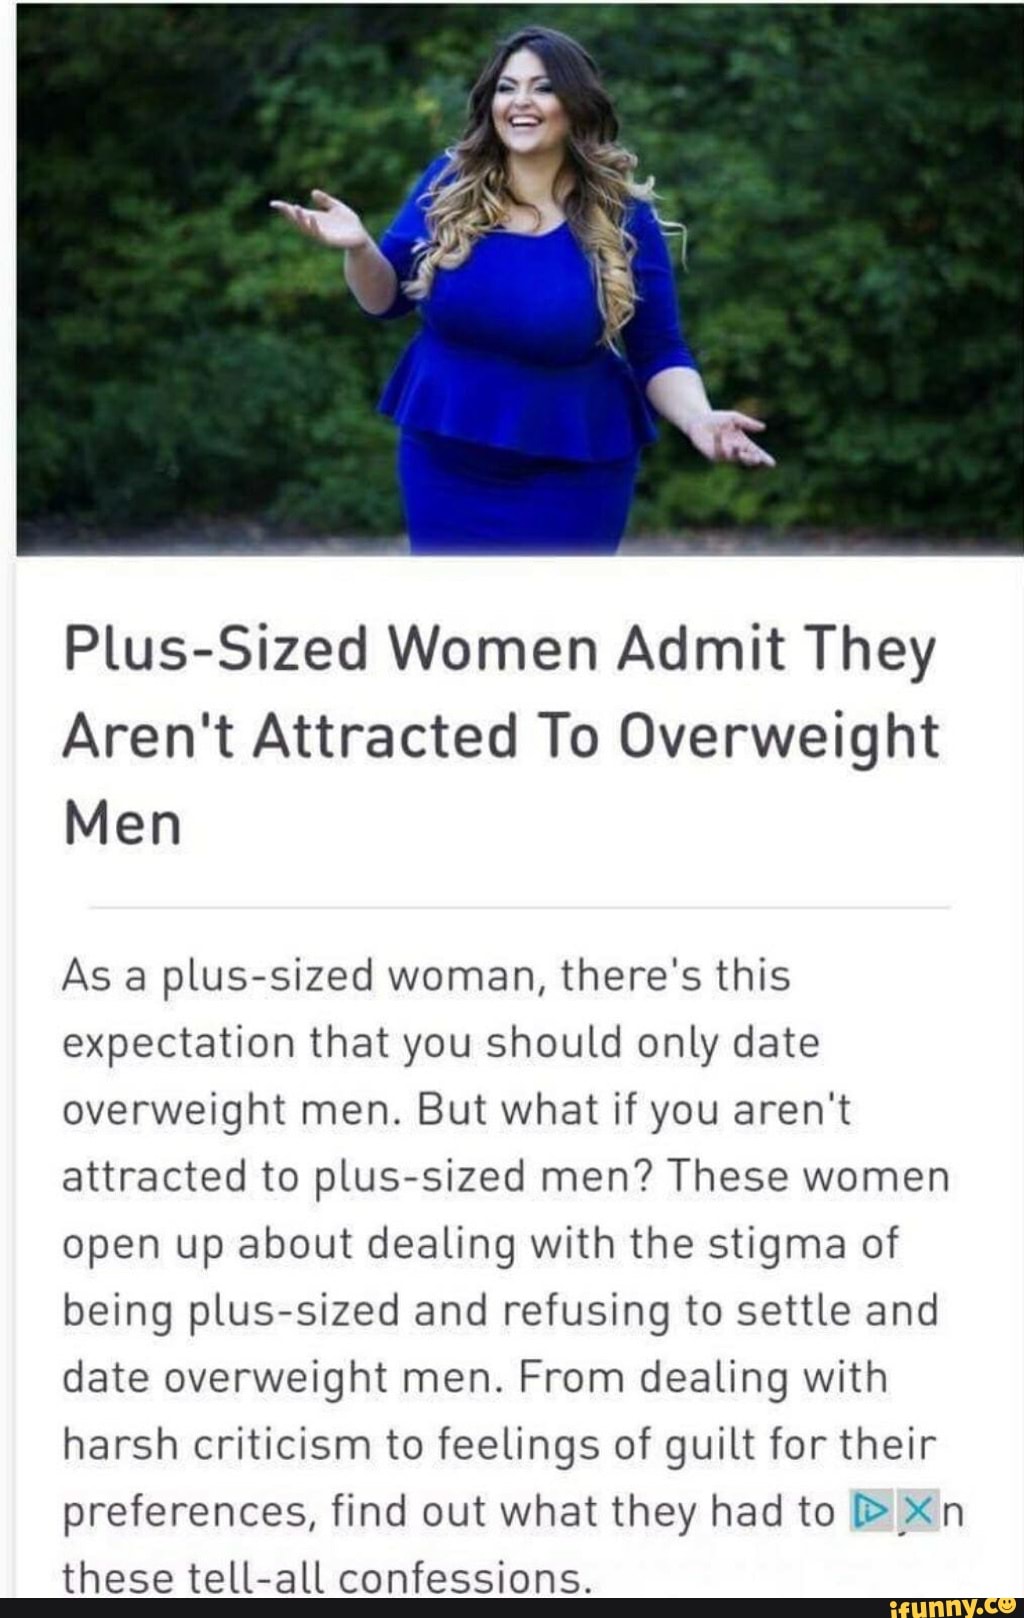 Morgenøvelser Balehval Økologi Plus-Sized Women Admit They Aren't Attracted To Overweight Men As a plus-sized  woman,